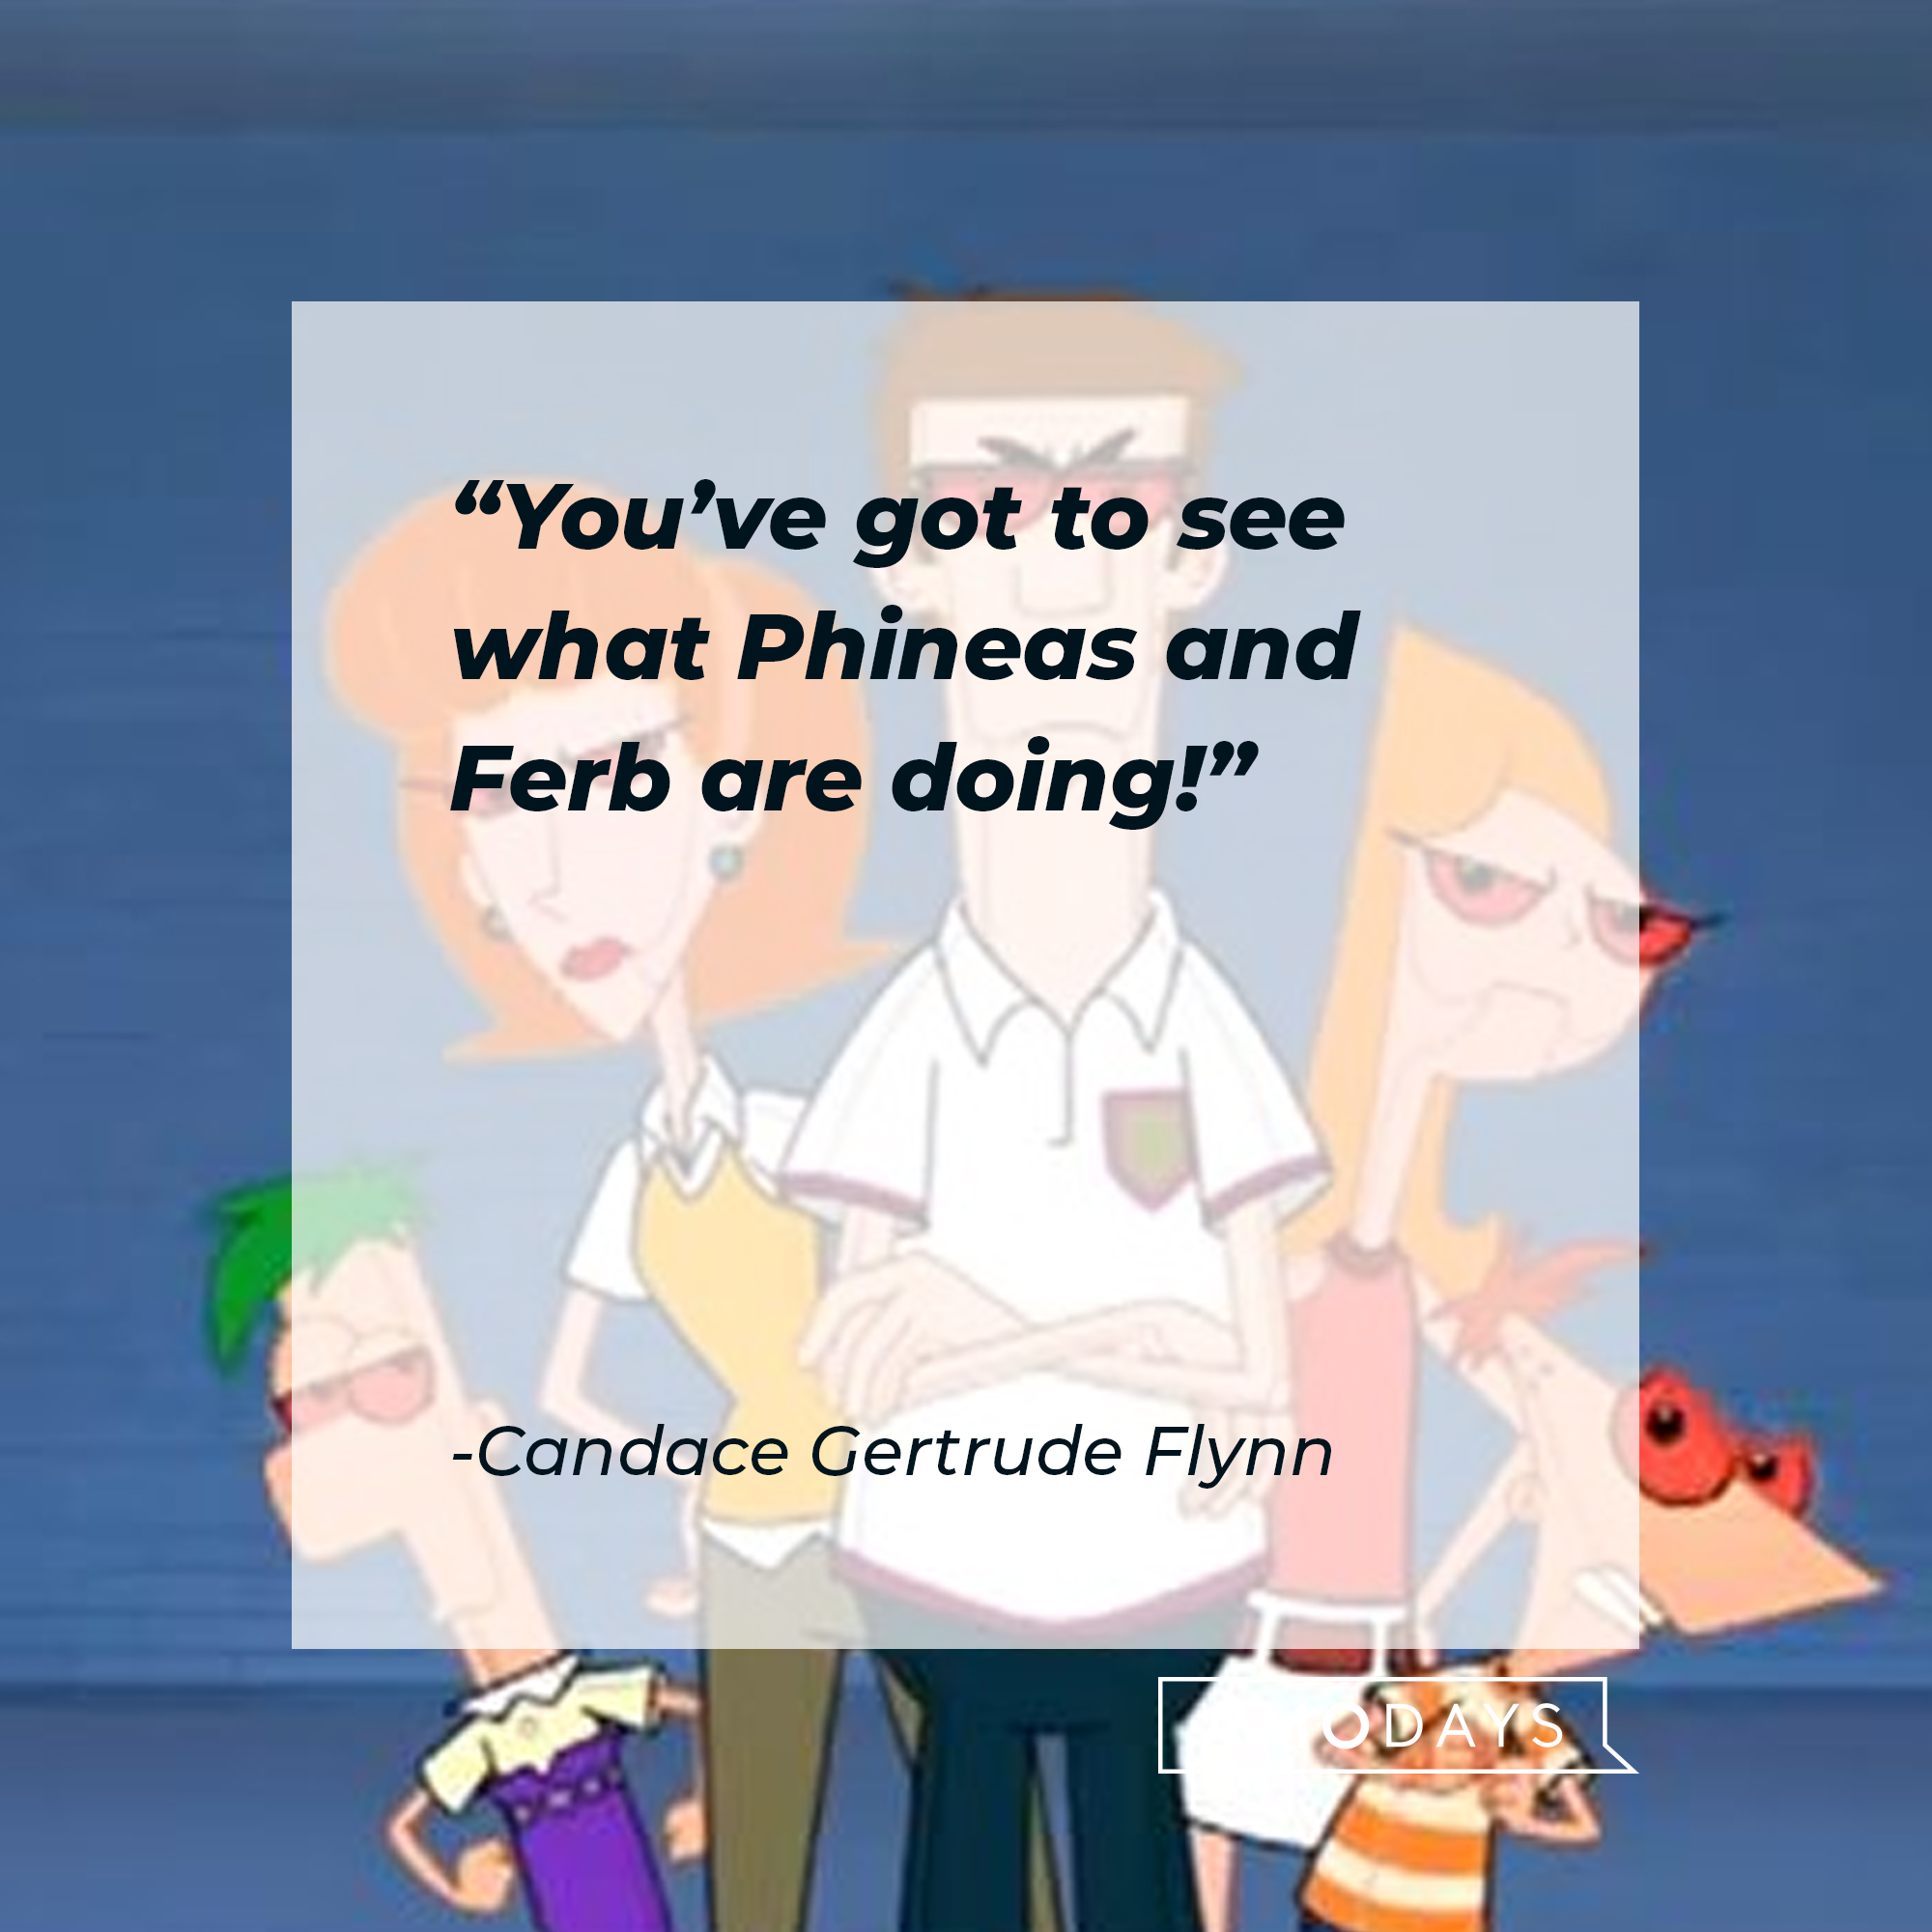 Candace Gertrude's quote: "You've got to see what Phineas and Ferb are doing!"| Source: facebook.com/Phineas-and-Ferb